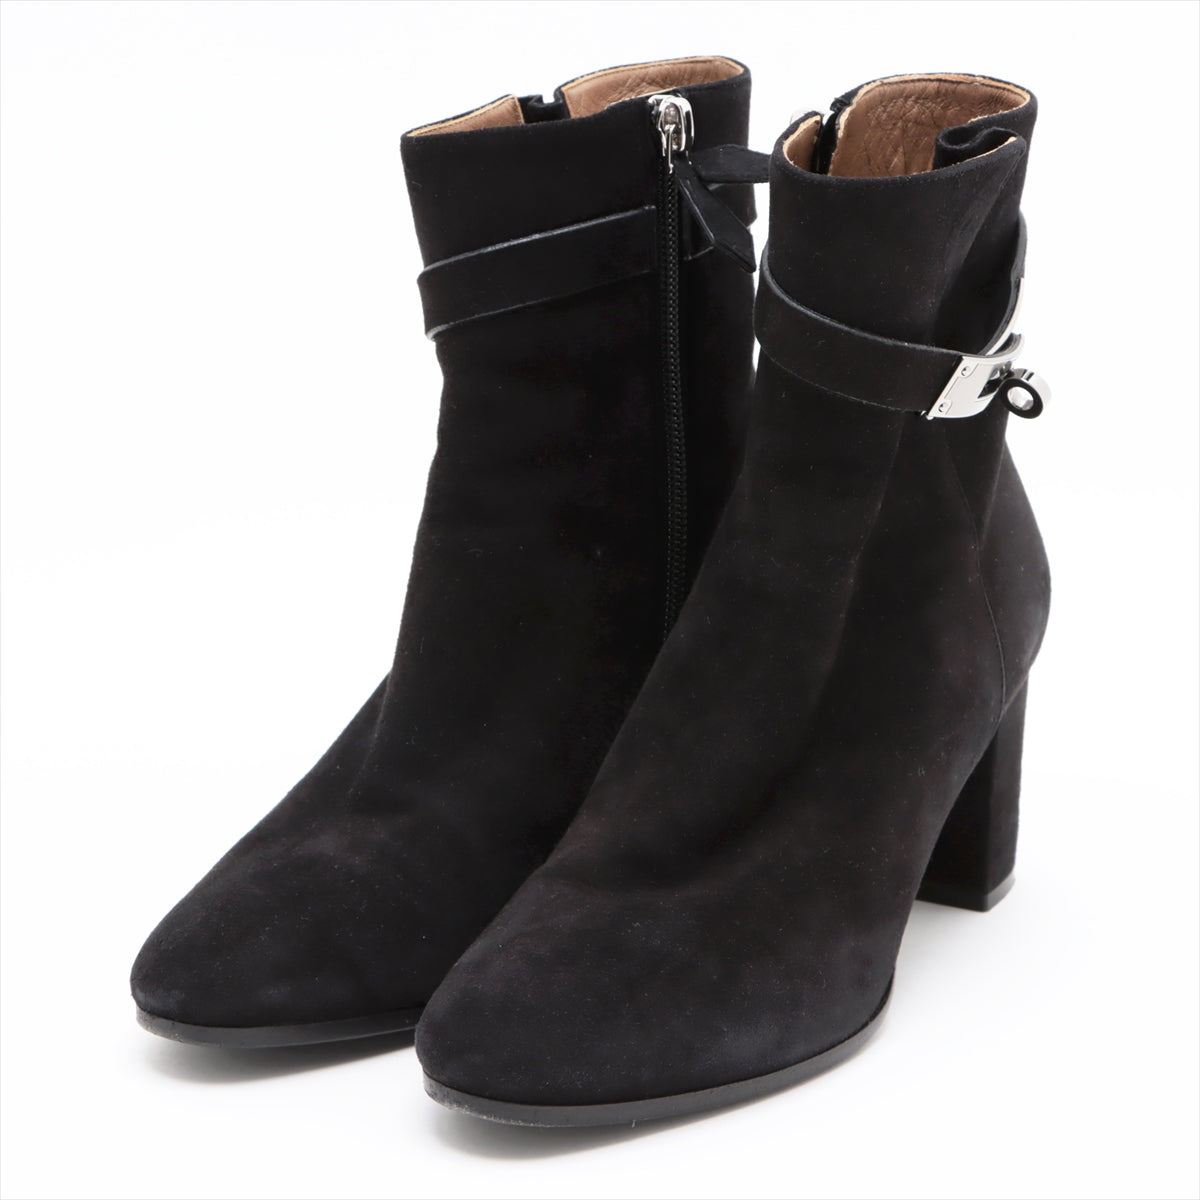 Hermès Saint Germain Suede leather Short Boots 35 Ladies' Black Kelly metal fittings box There is a bag